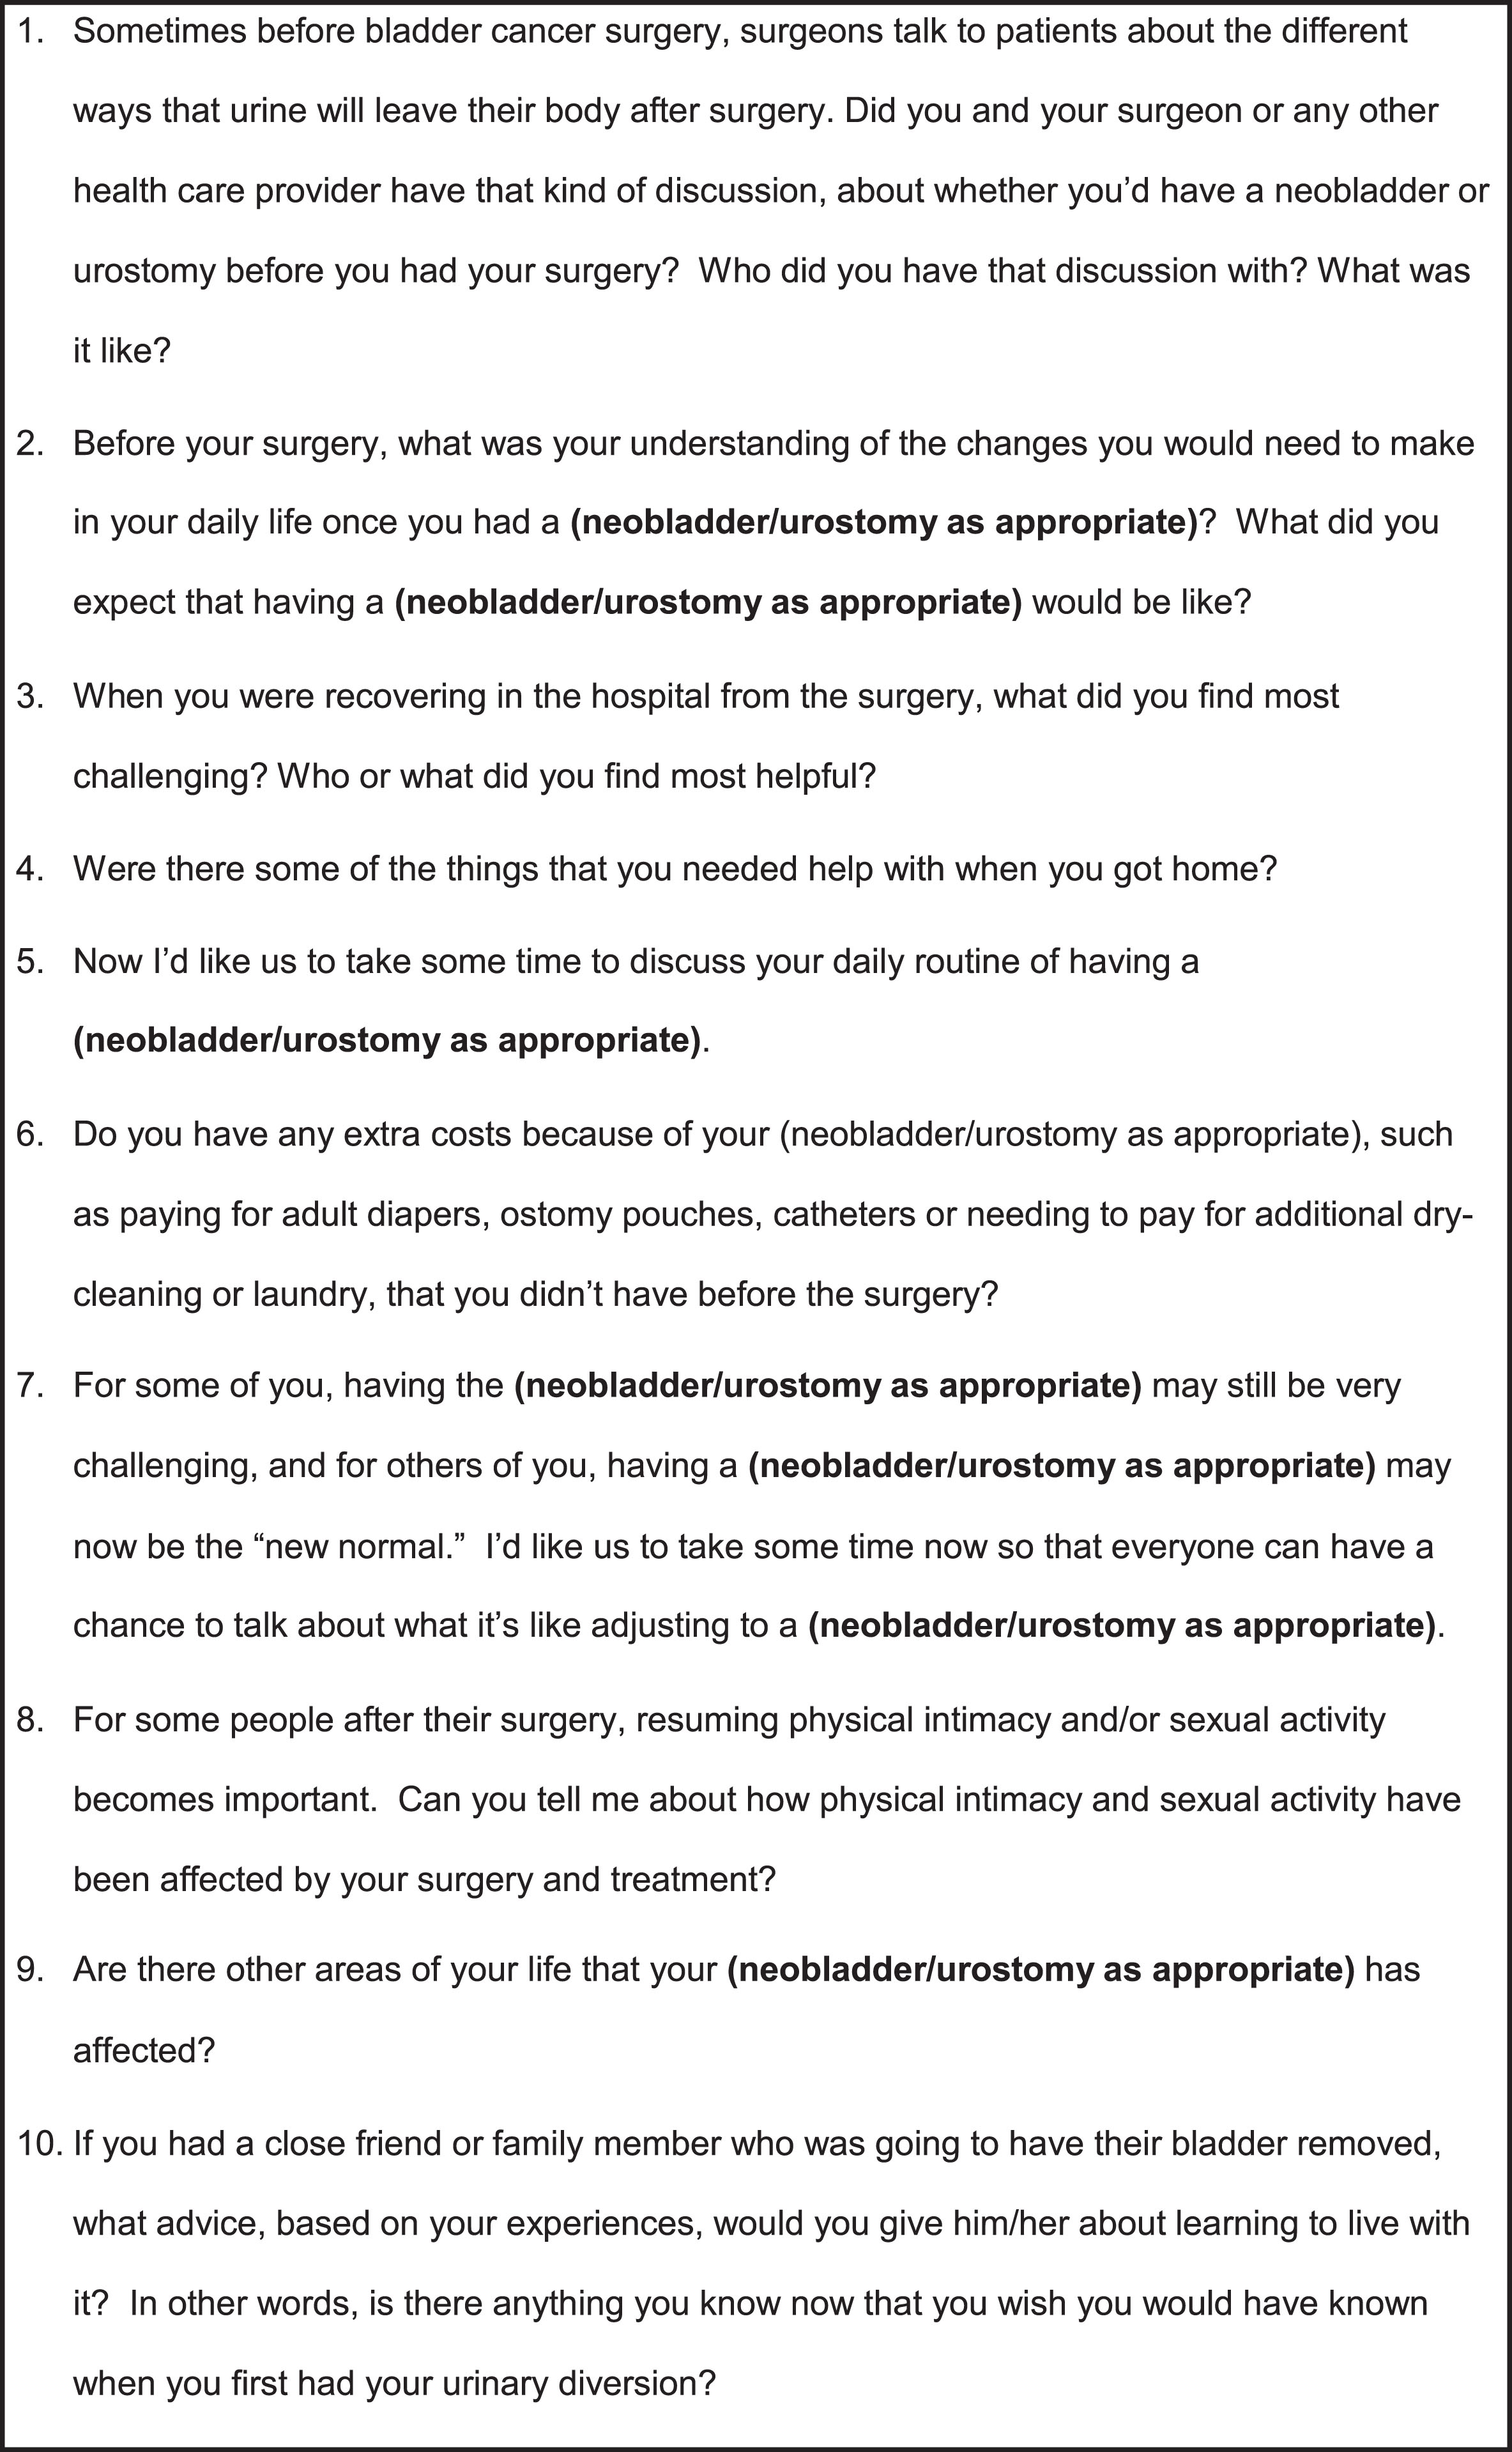 Discussion prompts for focus groups and individual interviews.